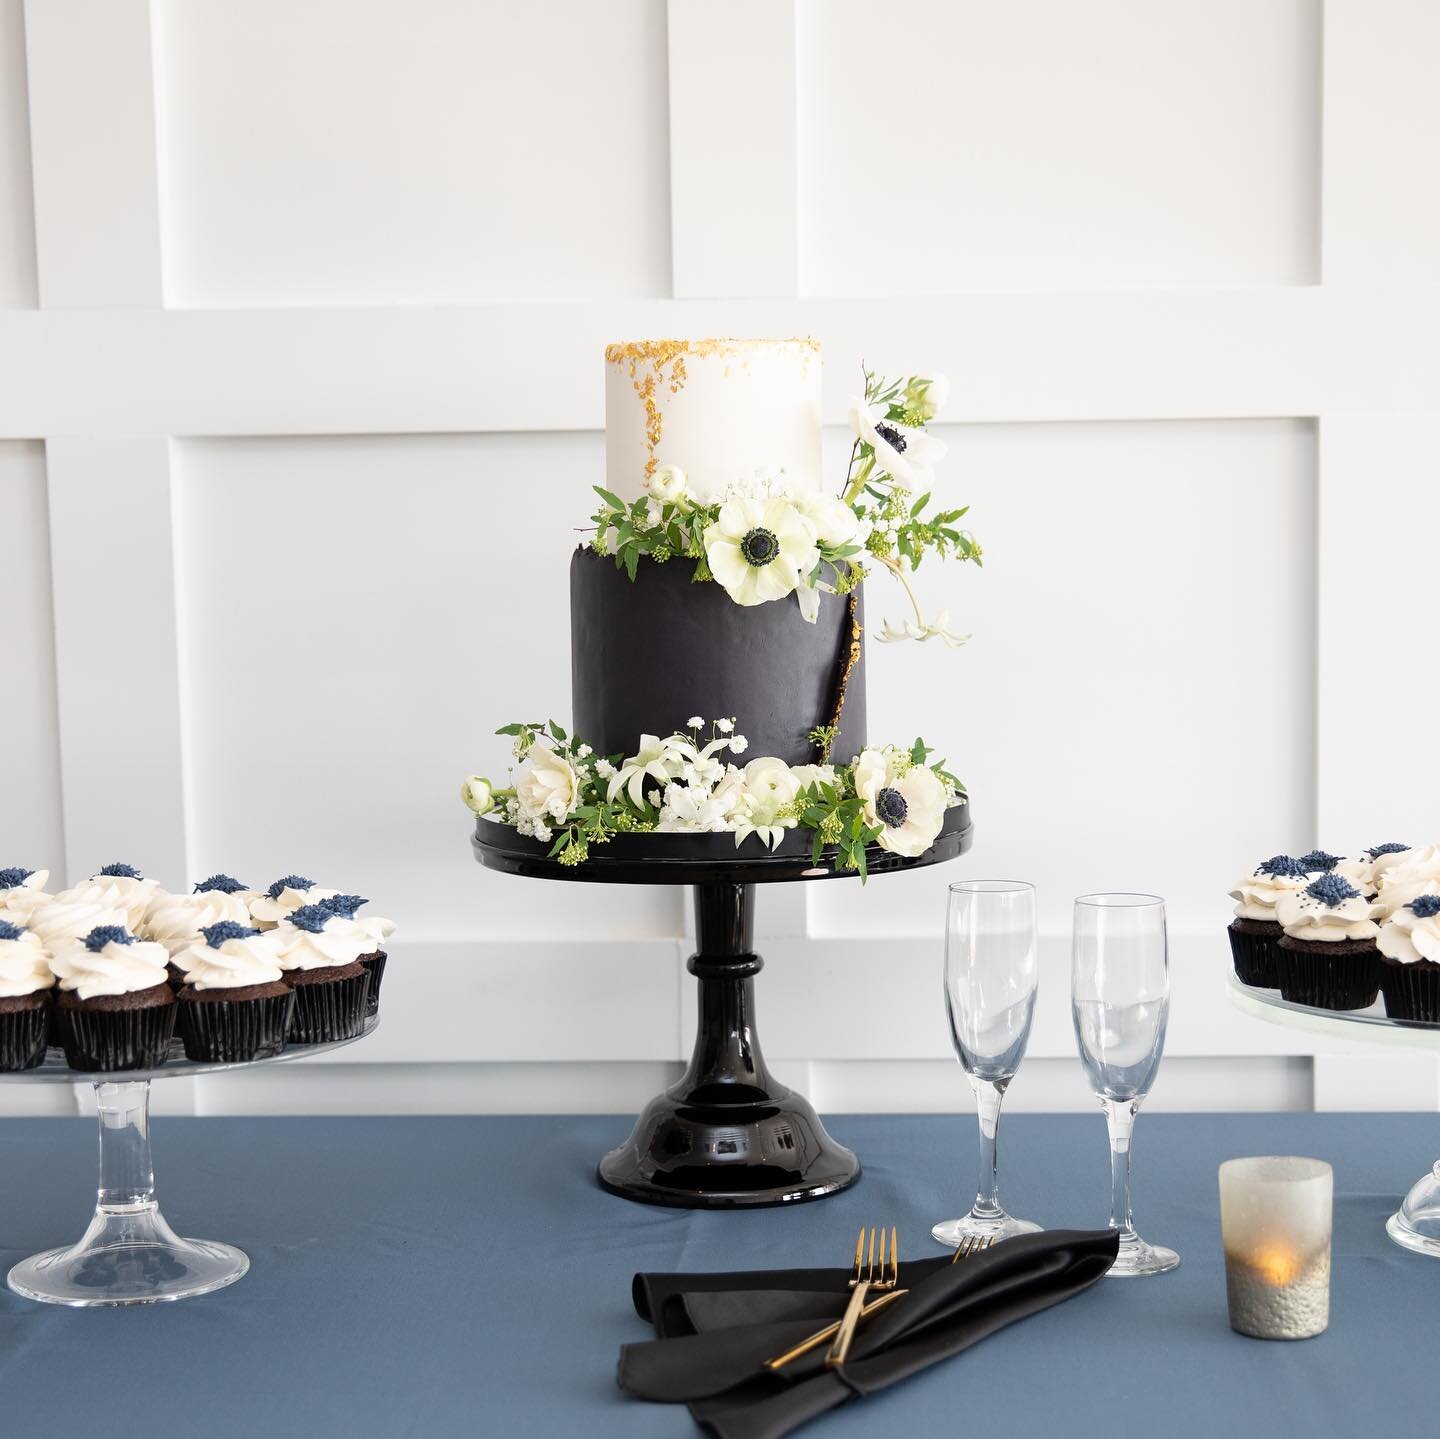 Thank you for inviting us to be involved in the Sip and Sea at Oceanic!  Enjoyed bringing this moody dark navy cake to life along with the handpiped anemone cupcakes.

Everything was lovely and came together beautifully!  Special thanks to @serendipi